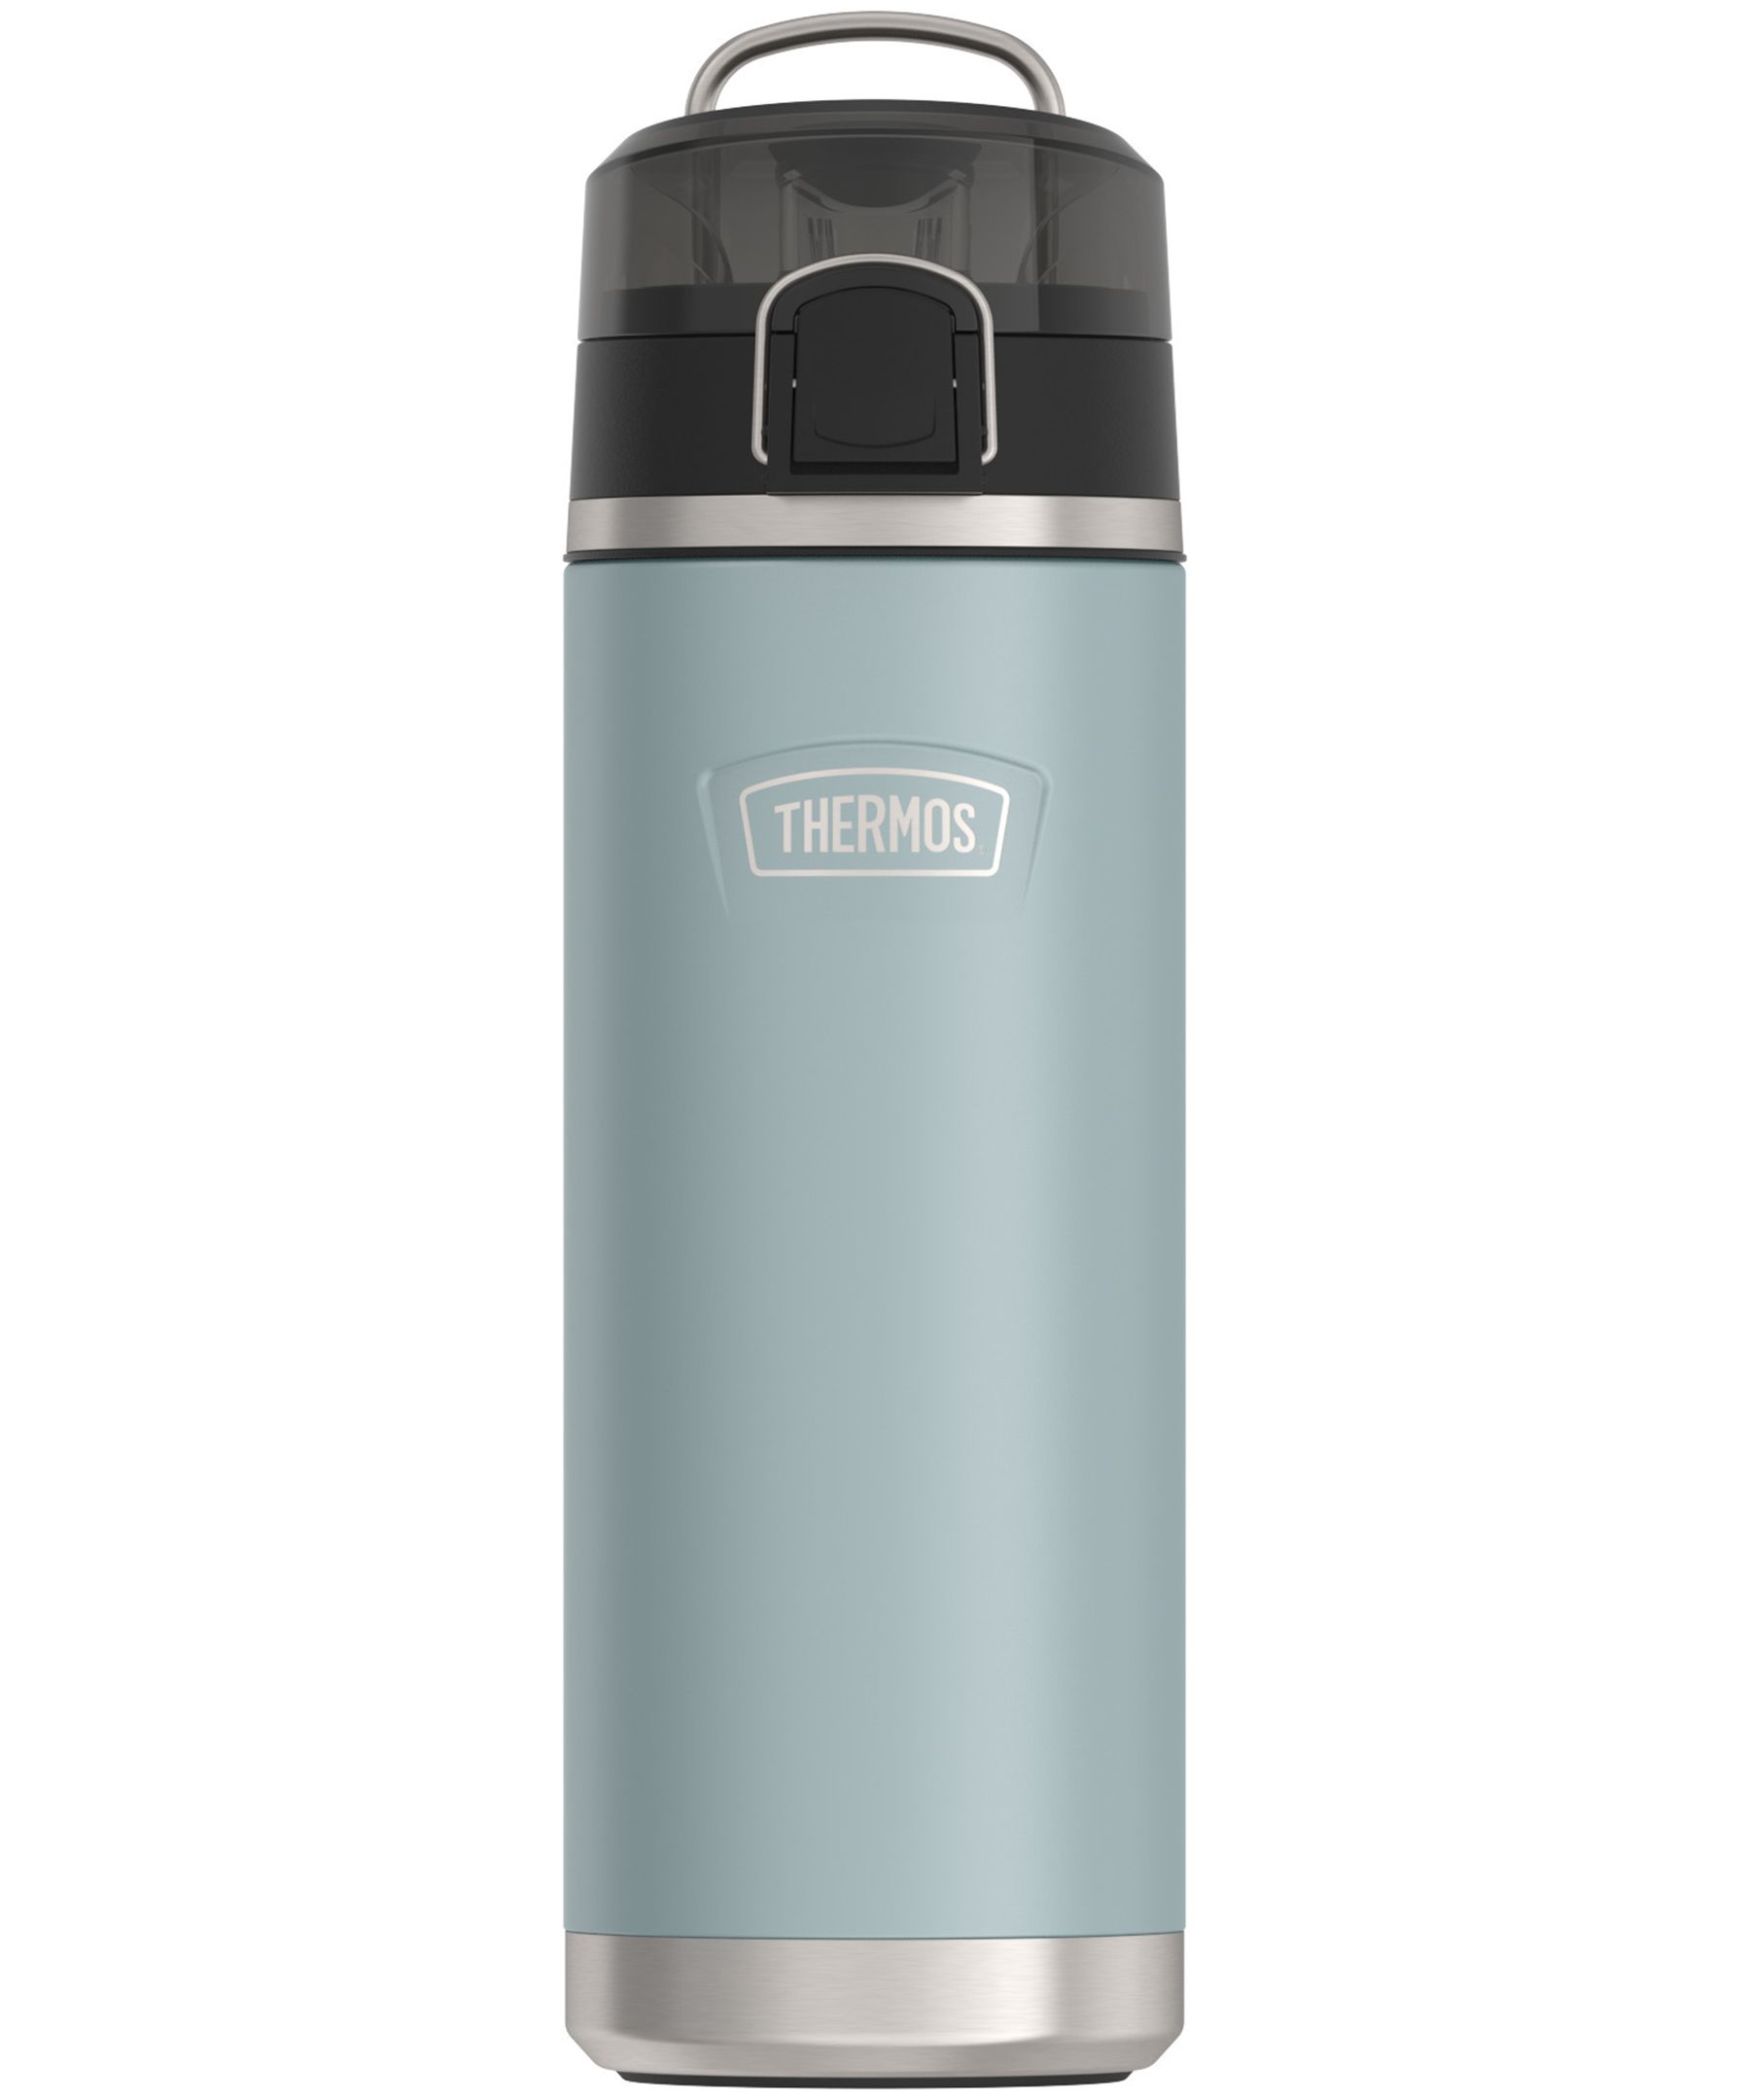 https://media-www.marks.com/product/marks-work-wearhouse/industrial-world/mens-accessories/410035840470/thermos-water-bottle-with-spout-710-ml-d394e543-2651-4a30-bd6d-d6a6318f3703-jpgrendition.jpg